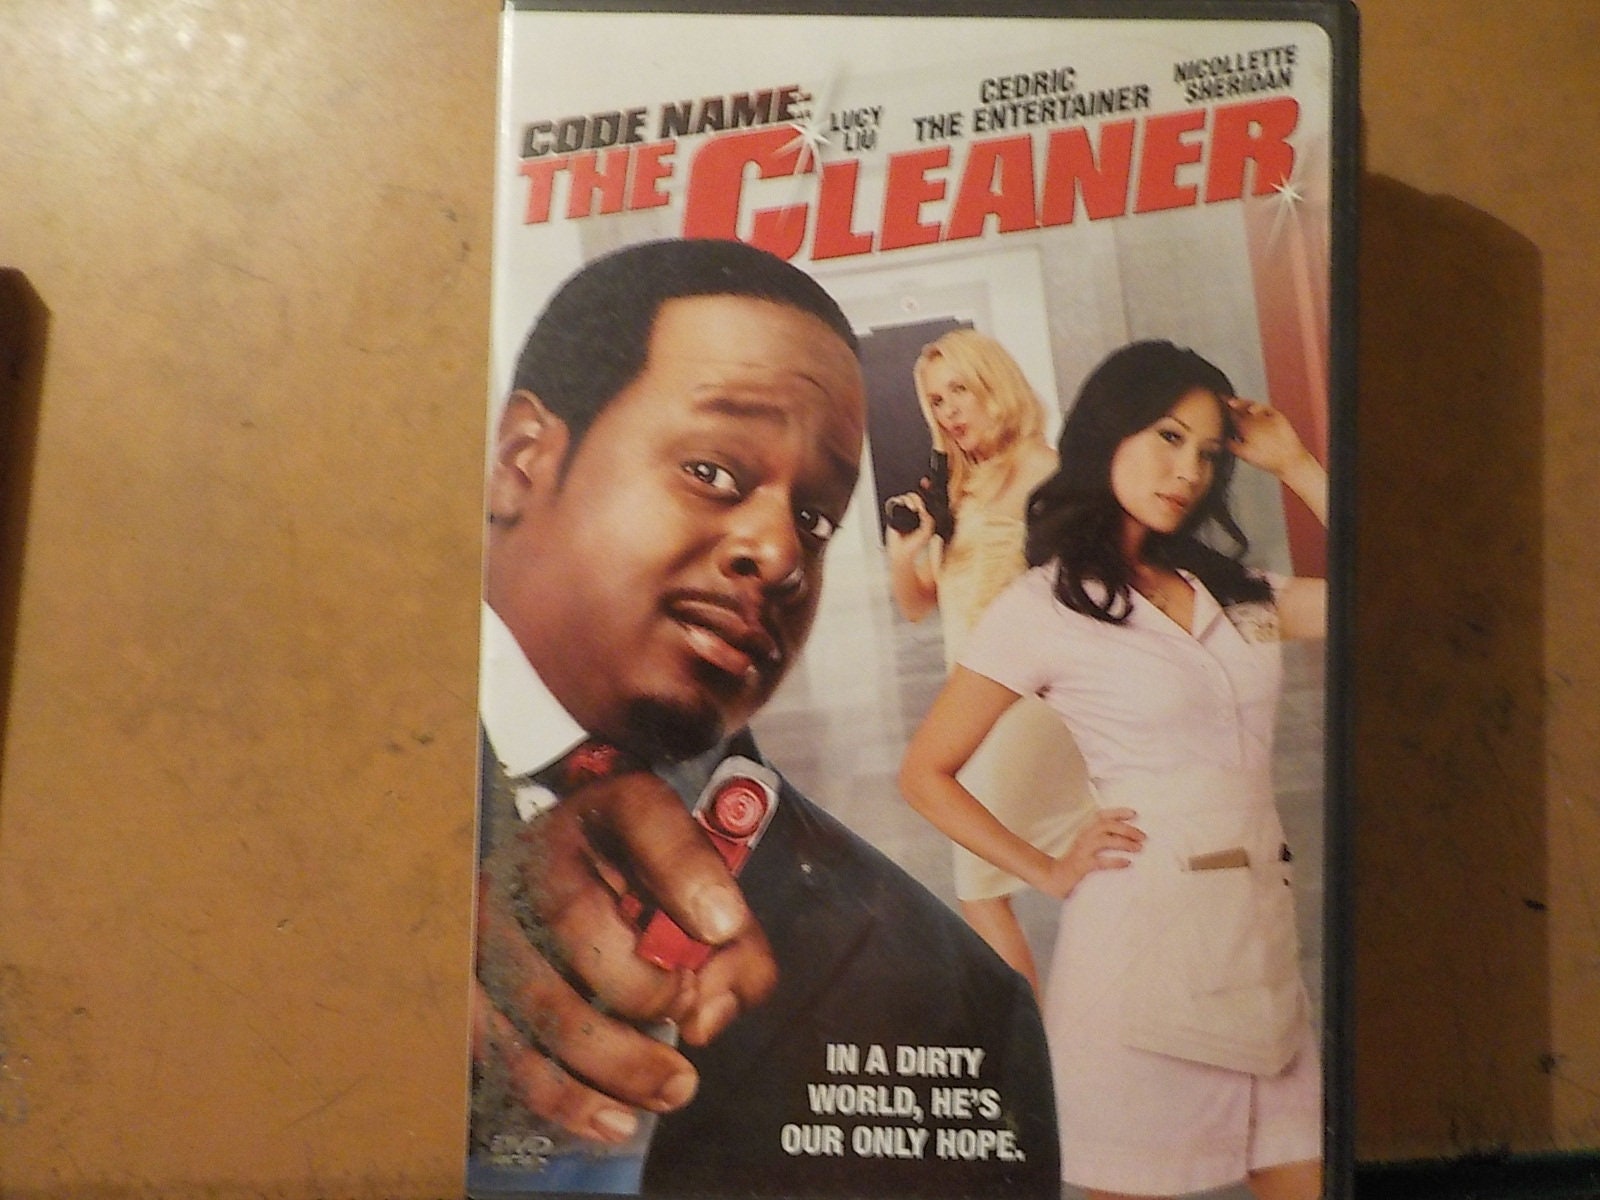 Best of The cleaner full movie